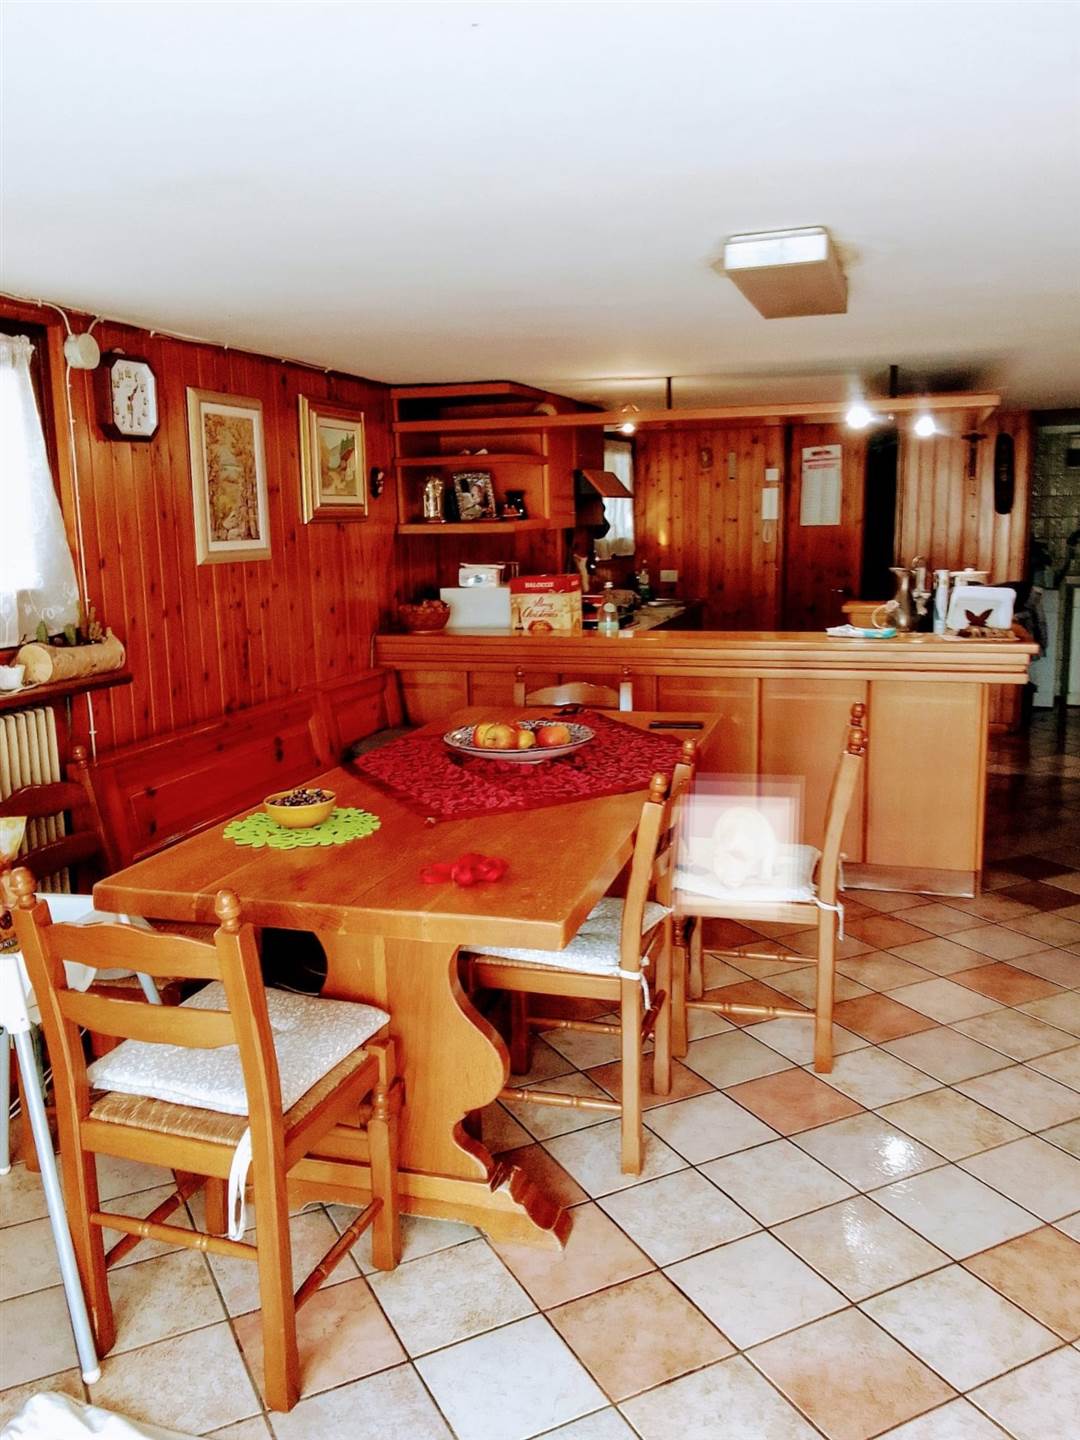 PAESE, Detached apartment for sale of 55 Sq. mt., Restored, Heating Individual heating system, Energetic class: G, placed at Raised, composed by: 2 